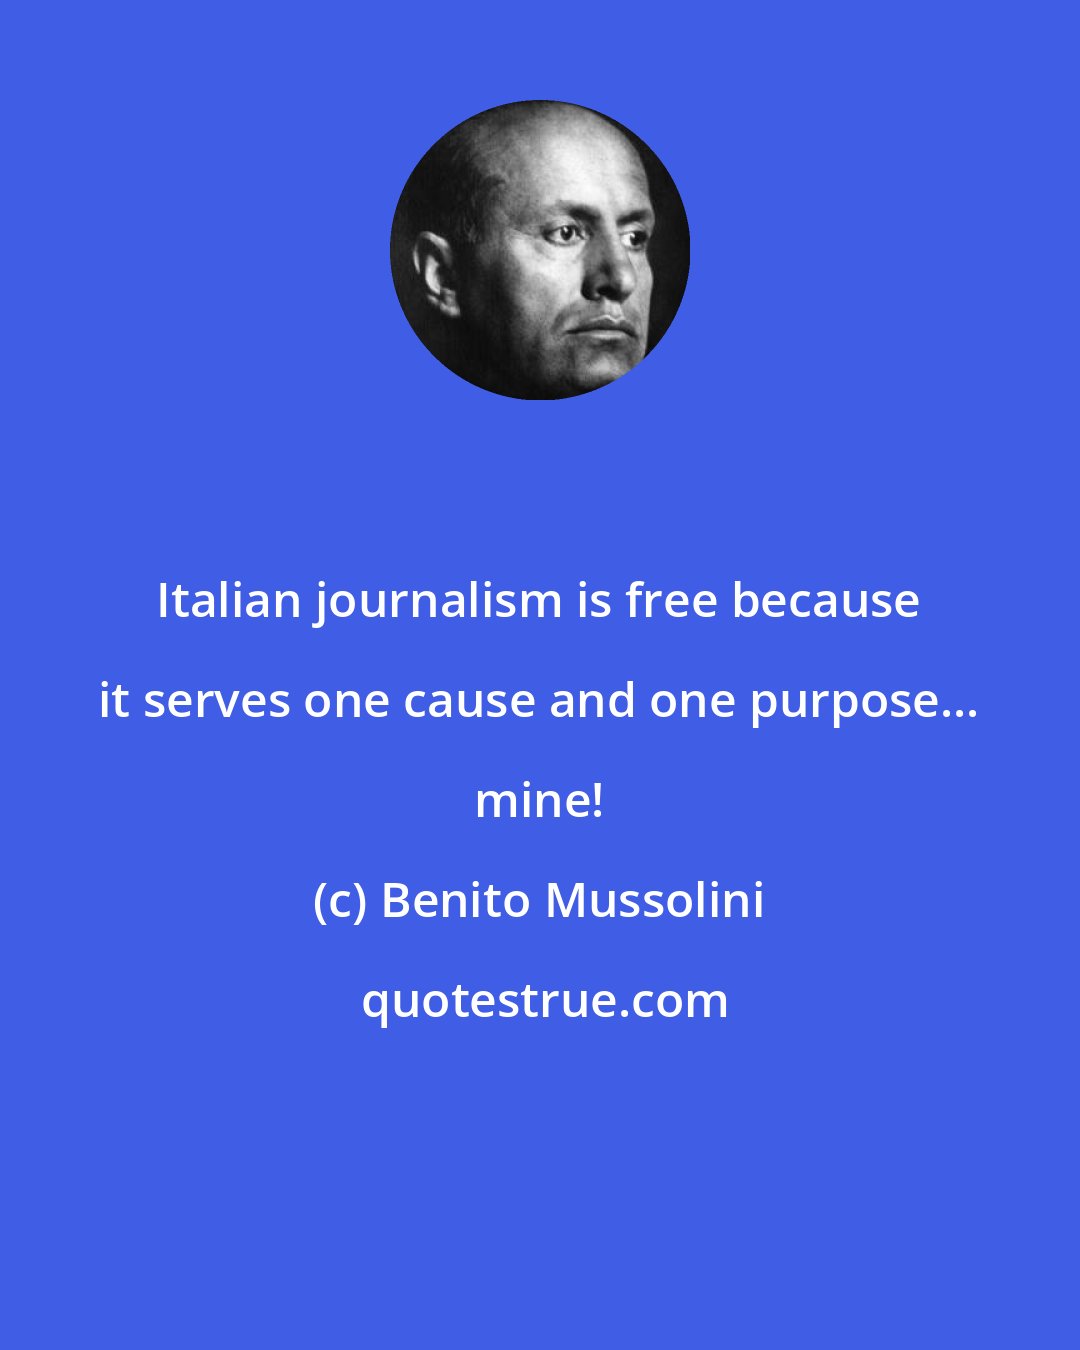 Benito Mussolini: Italian journalism is free because it serves one cause and one purpose... mine!